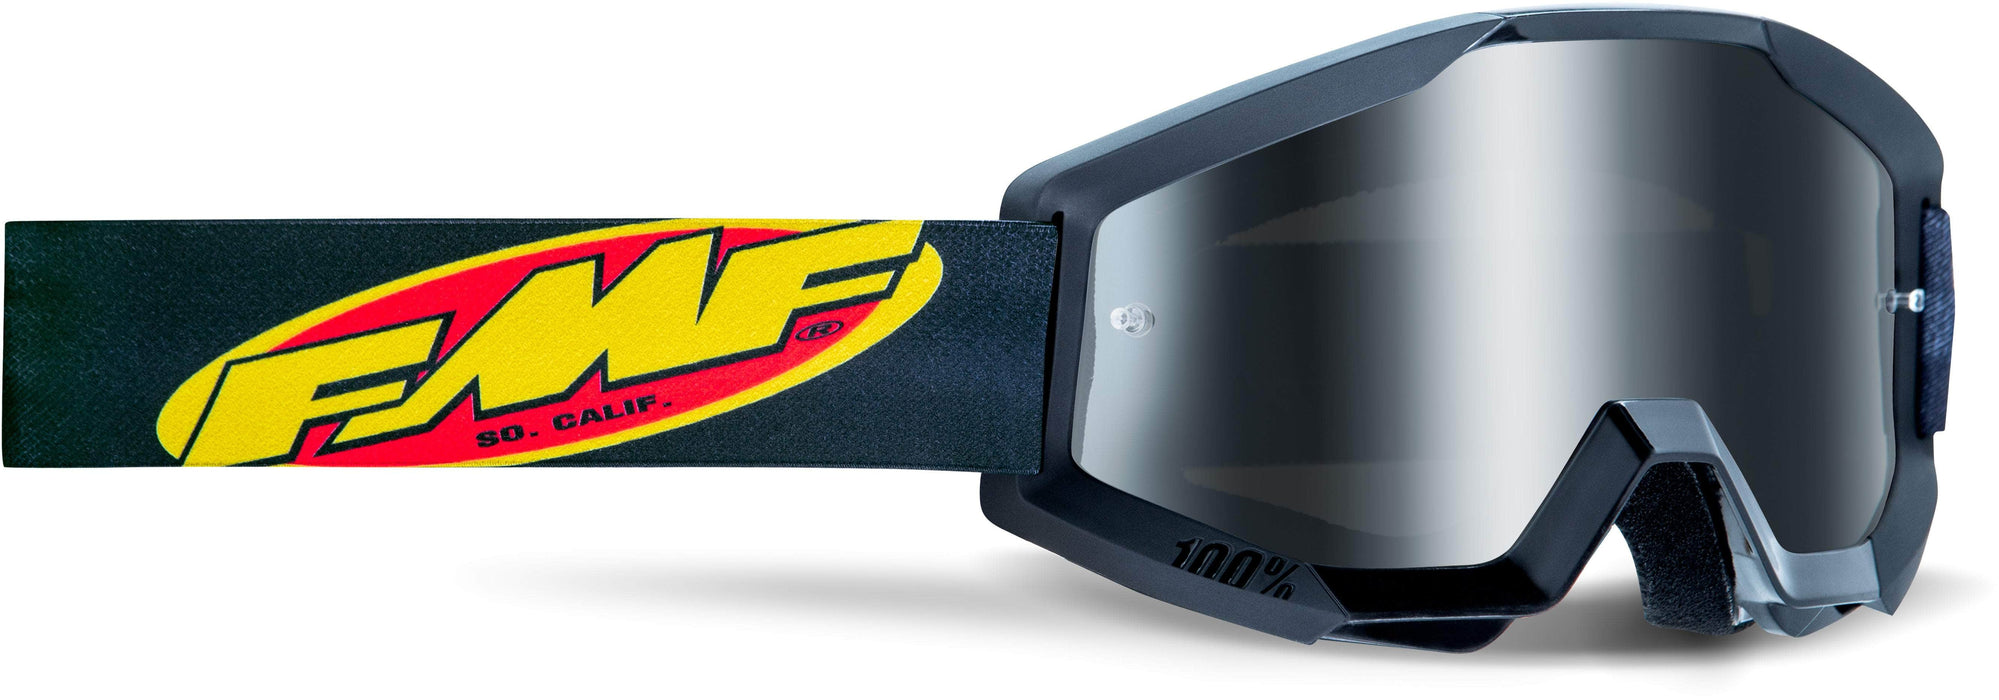 FMF Protection Black Mirror Silver Lens FMF by 100% PowerCore Youth Goggle Core Black Mirror Silver Lens